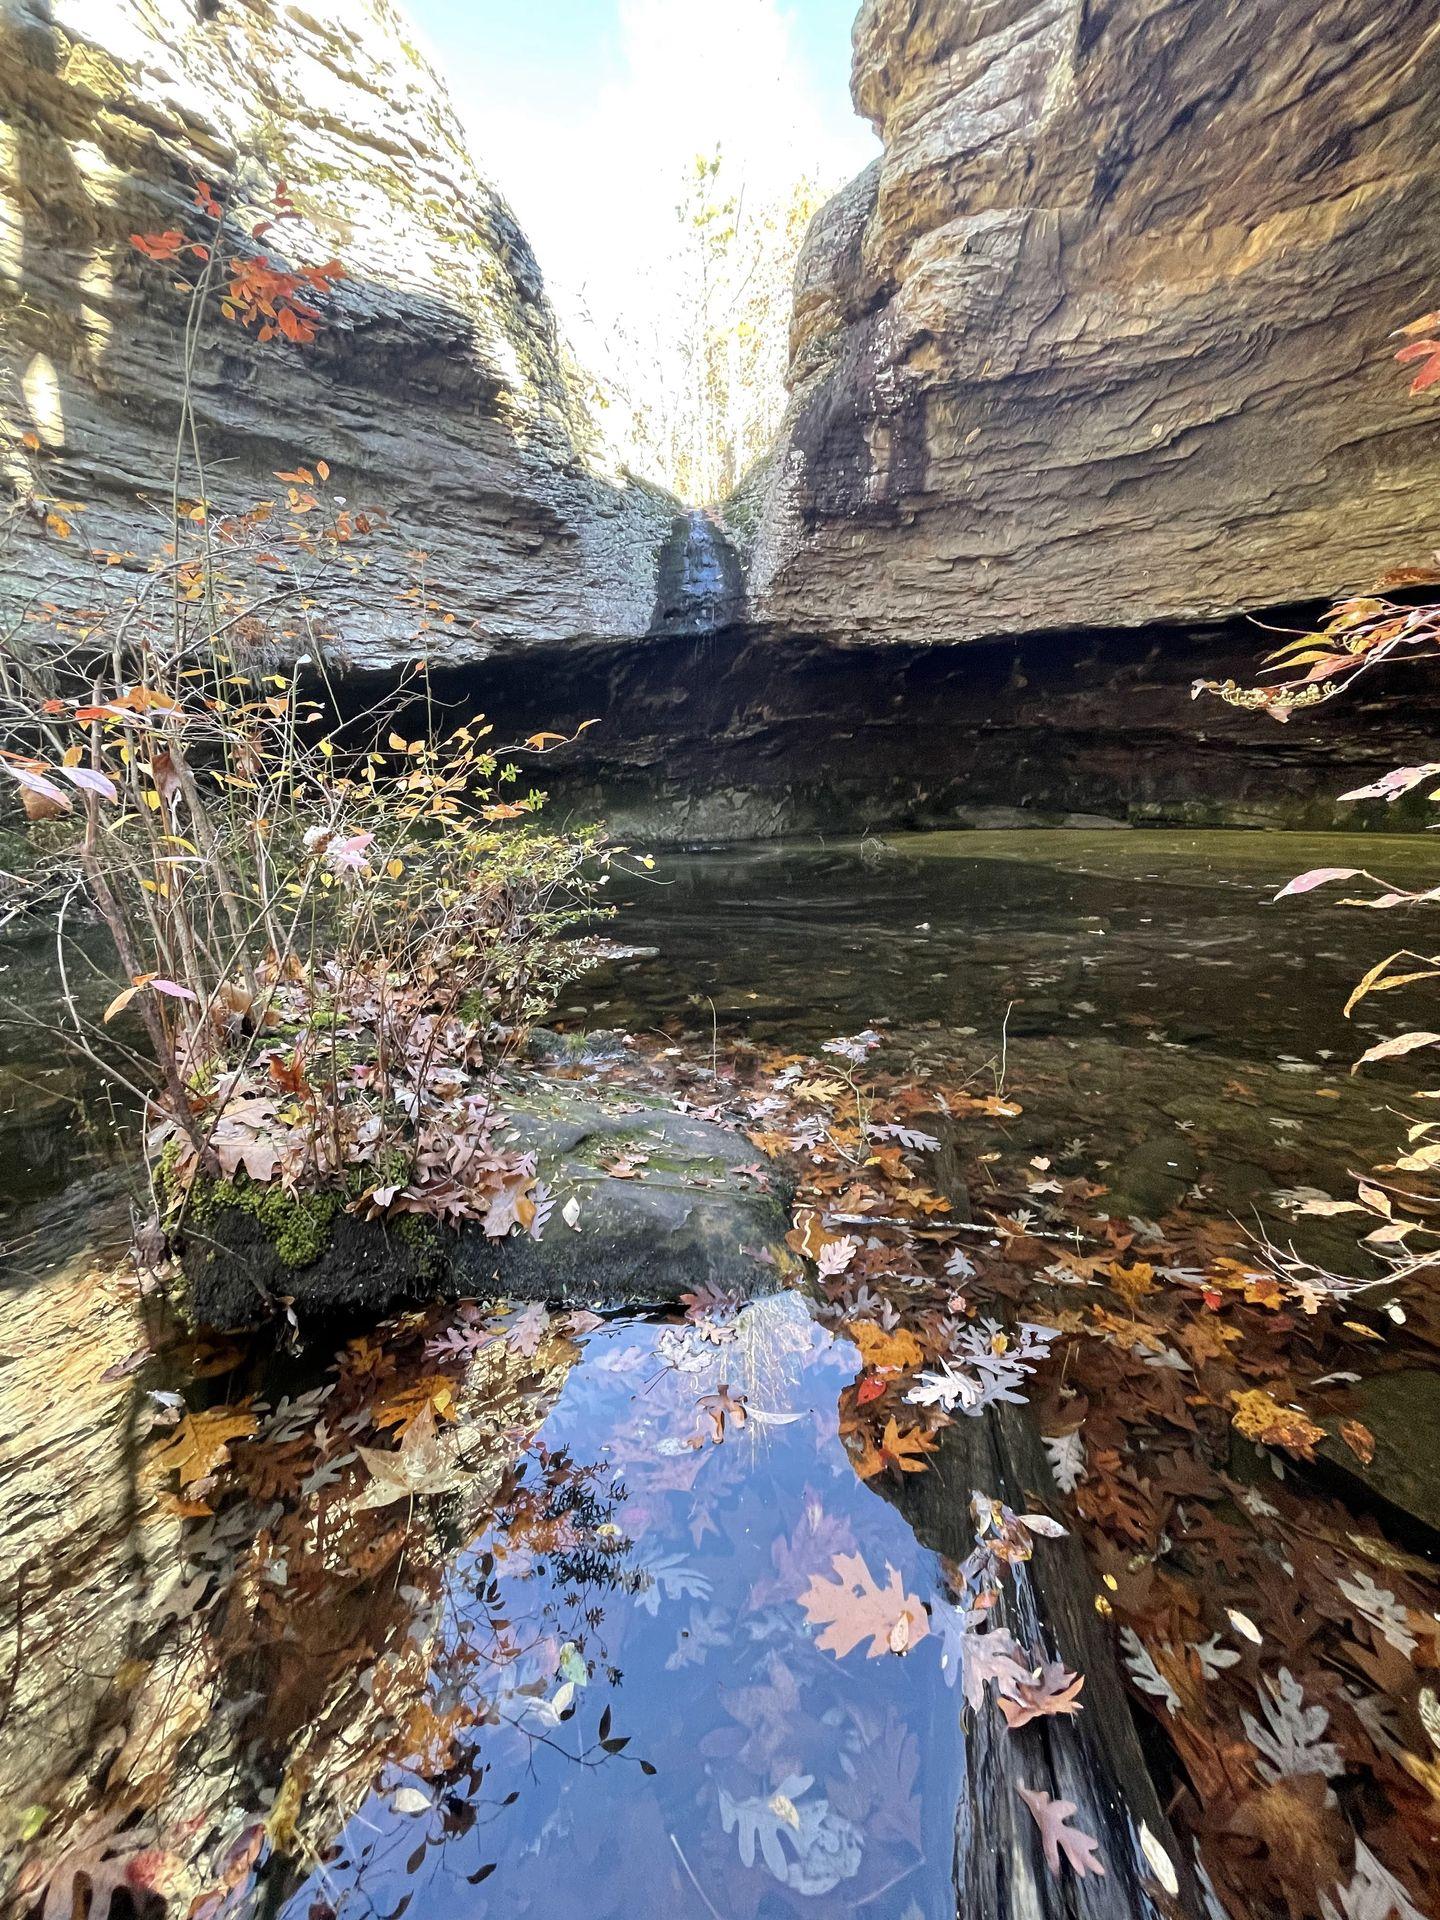 The grotto on the Seven Hollow Trail. The waterfall is just trickling into the pool below.